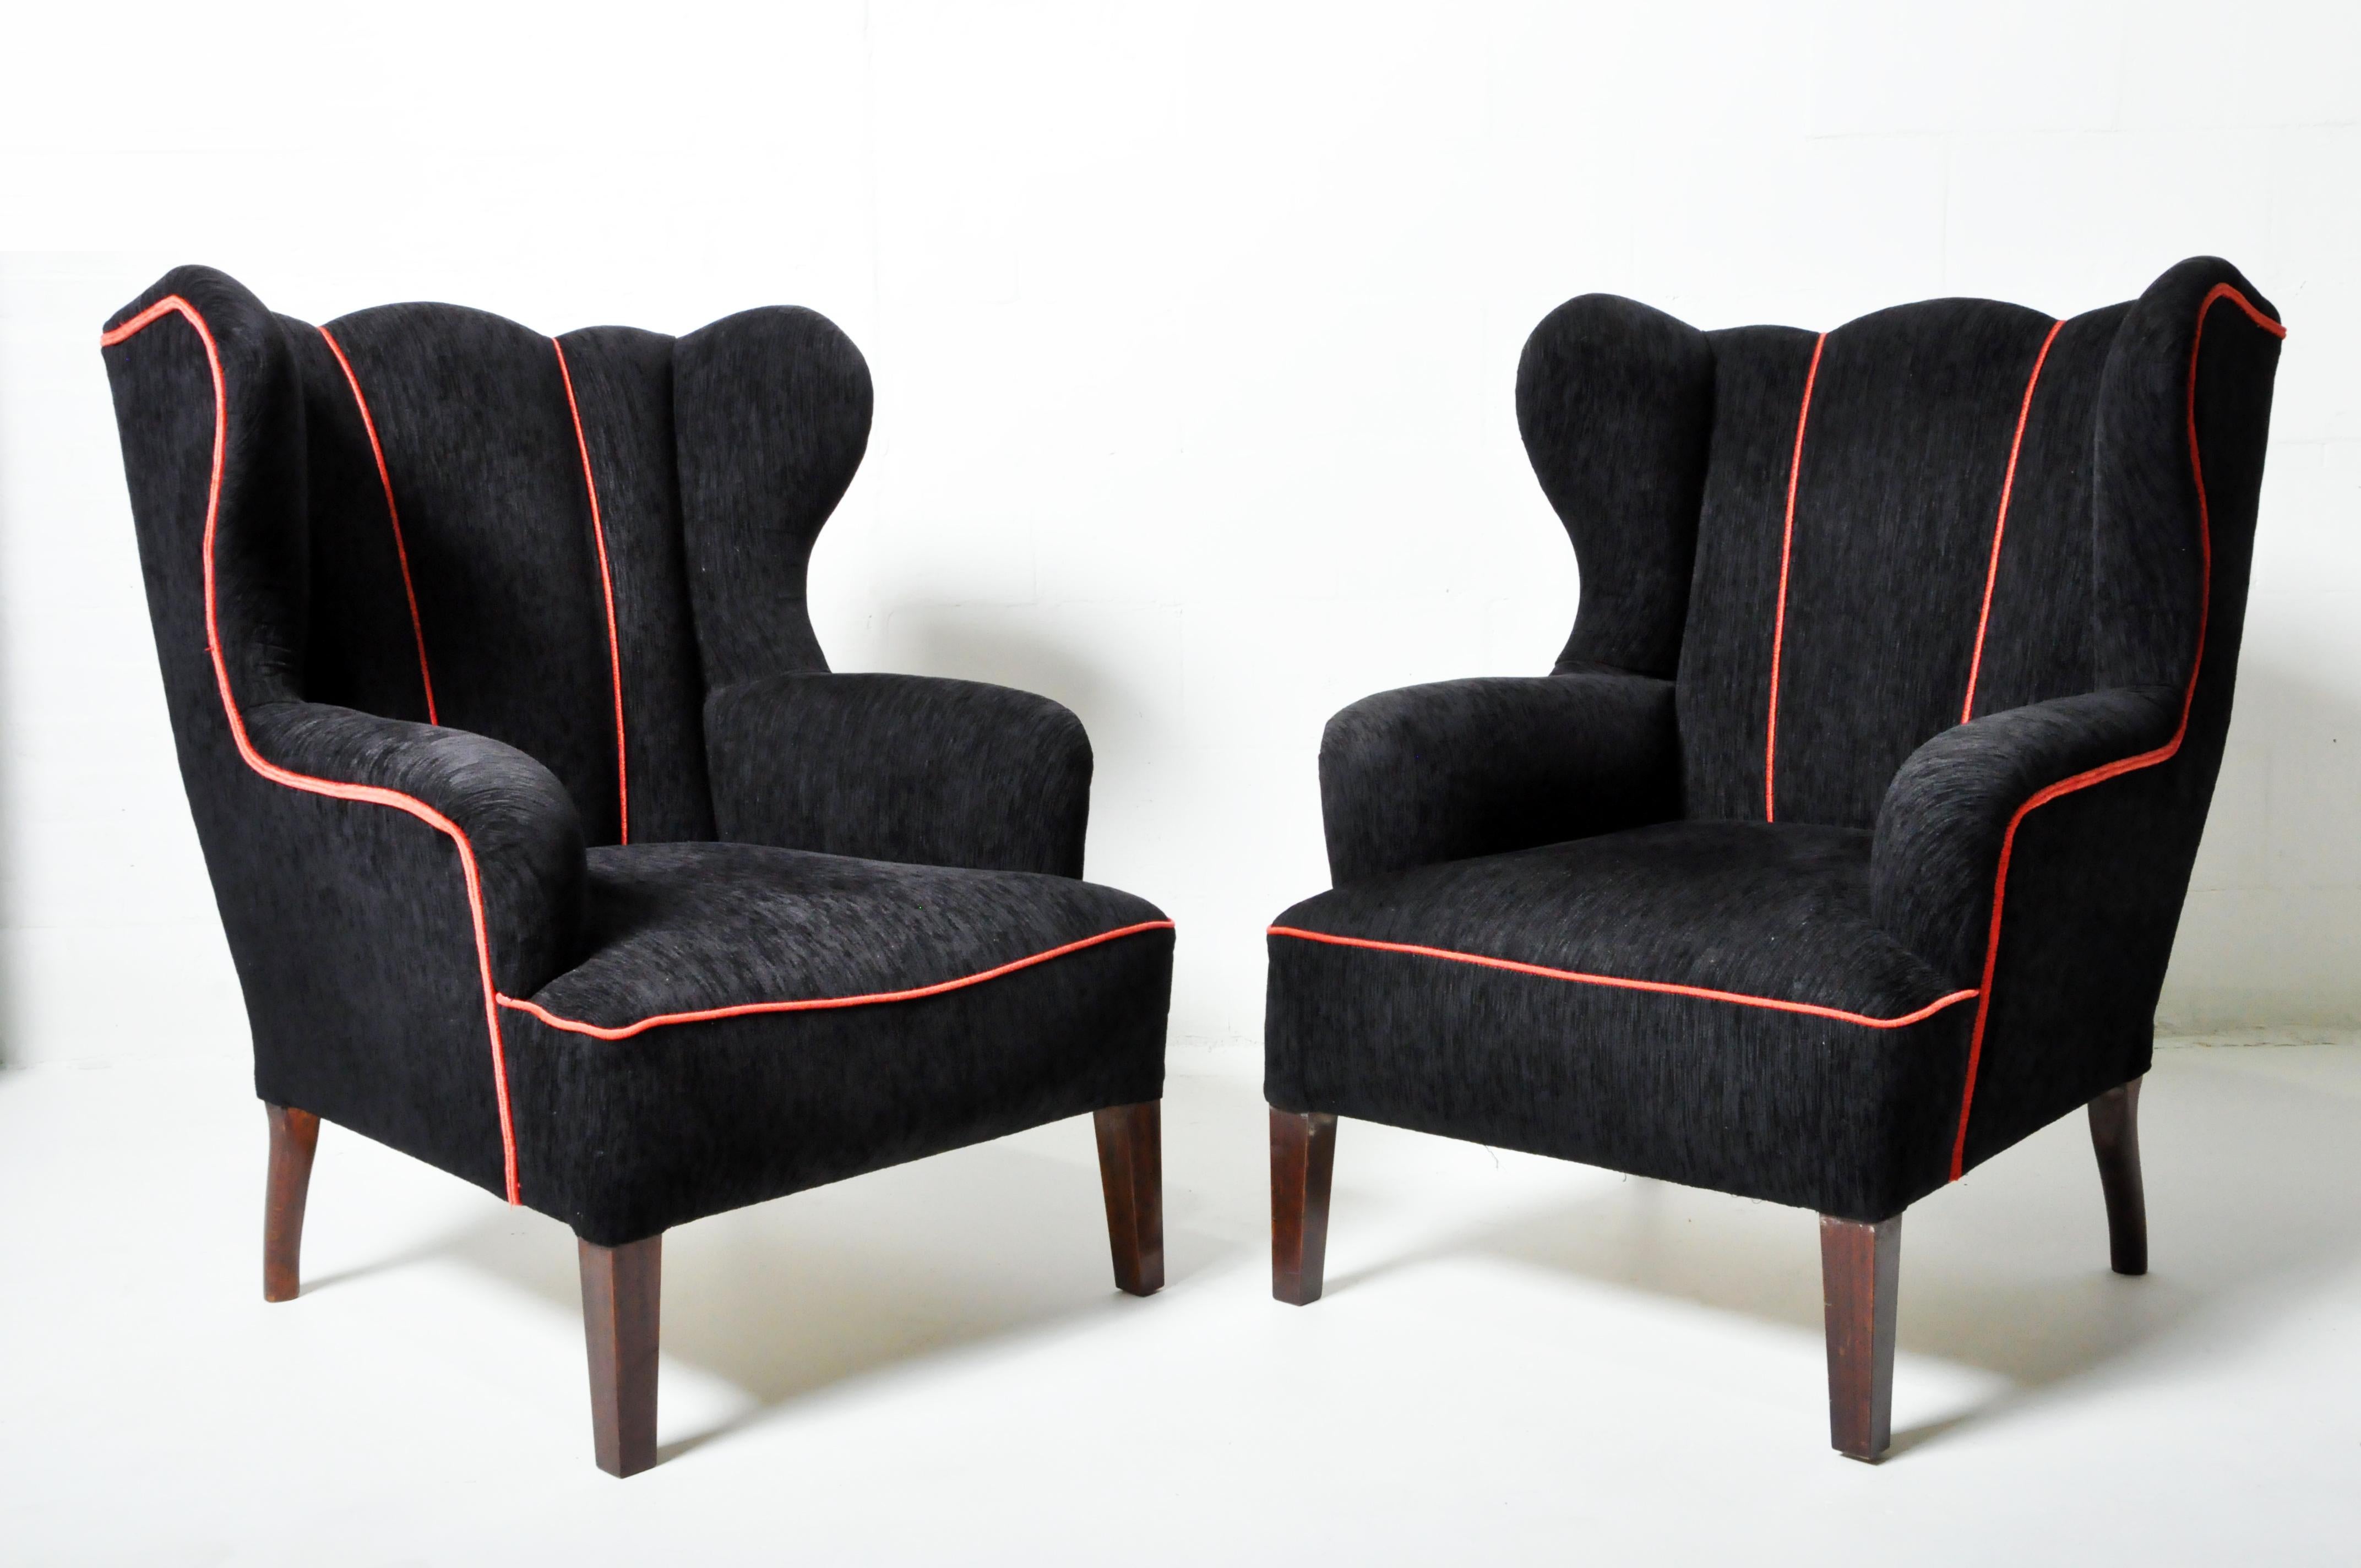 This pair of wingback chairs is a 1950's Hungarian interpretation of the classic form. Wingbacks were originally created to block the air in drafty rooms. These chairs are modernized and streamlined but still cozy and comfortable. Upholstered in